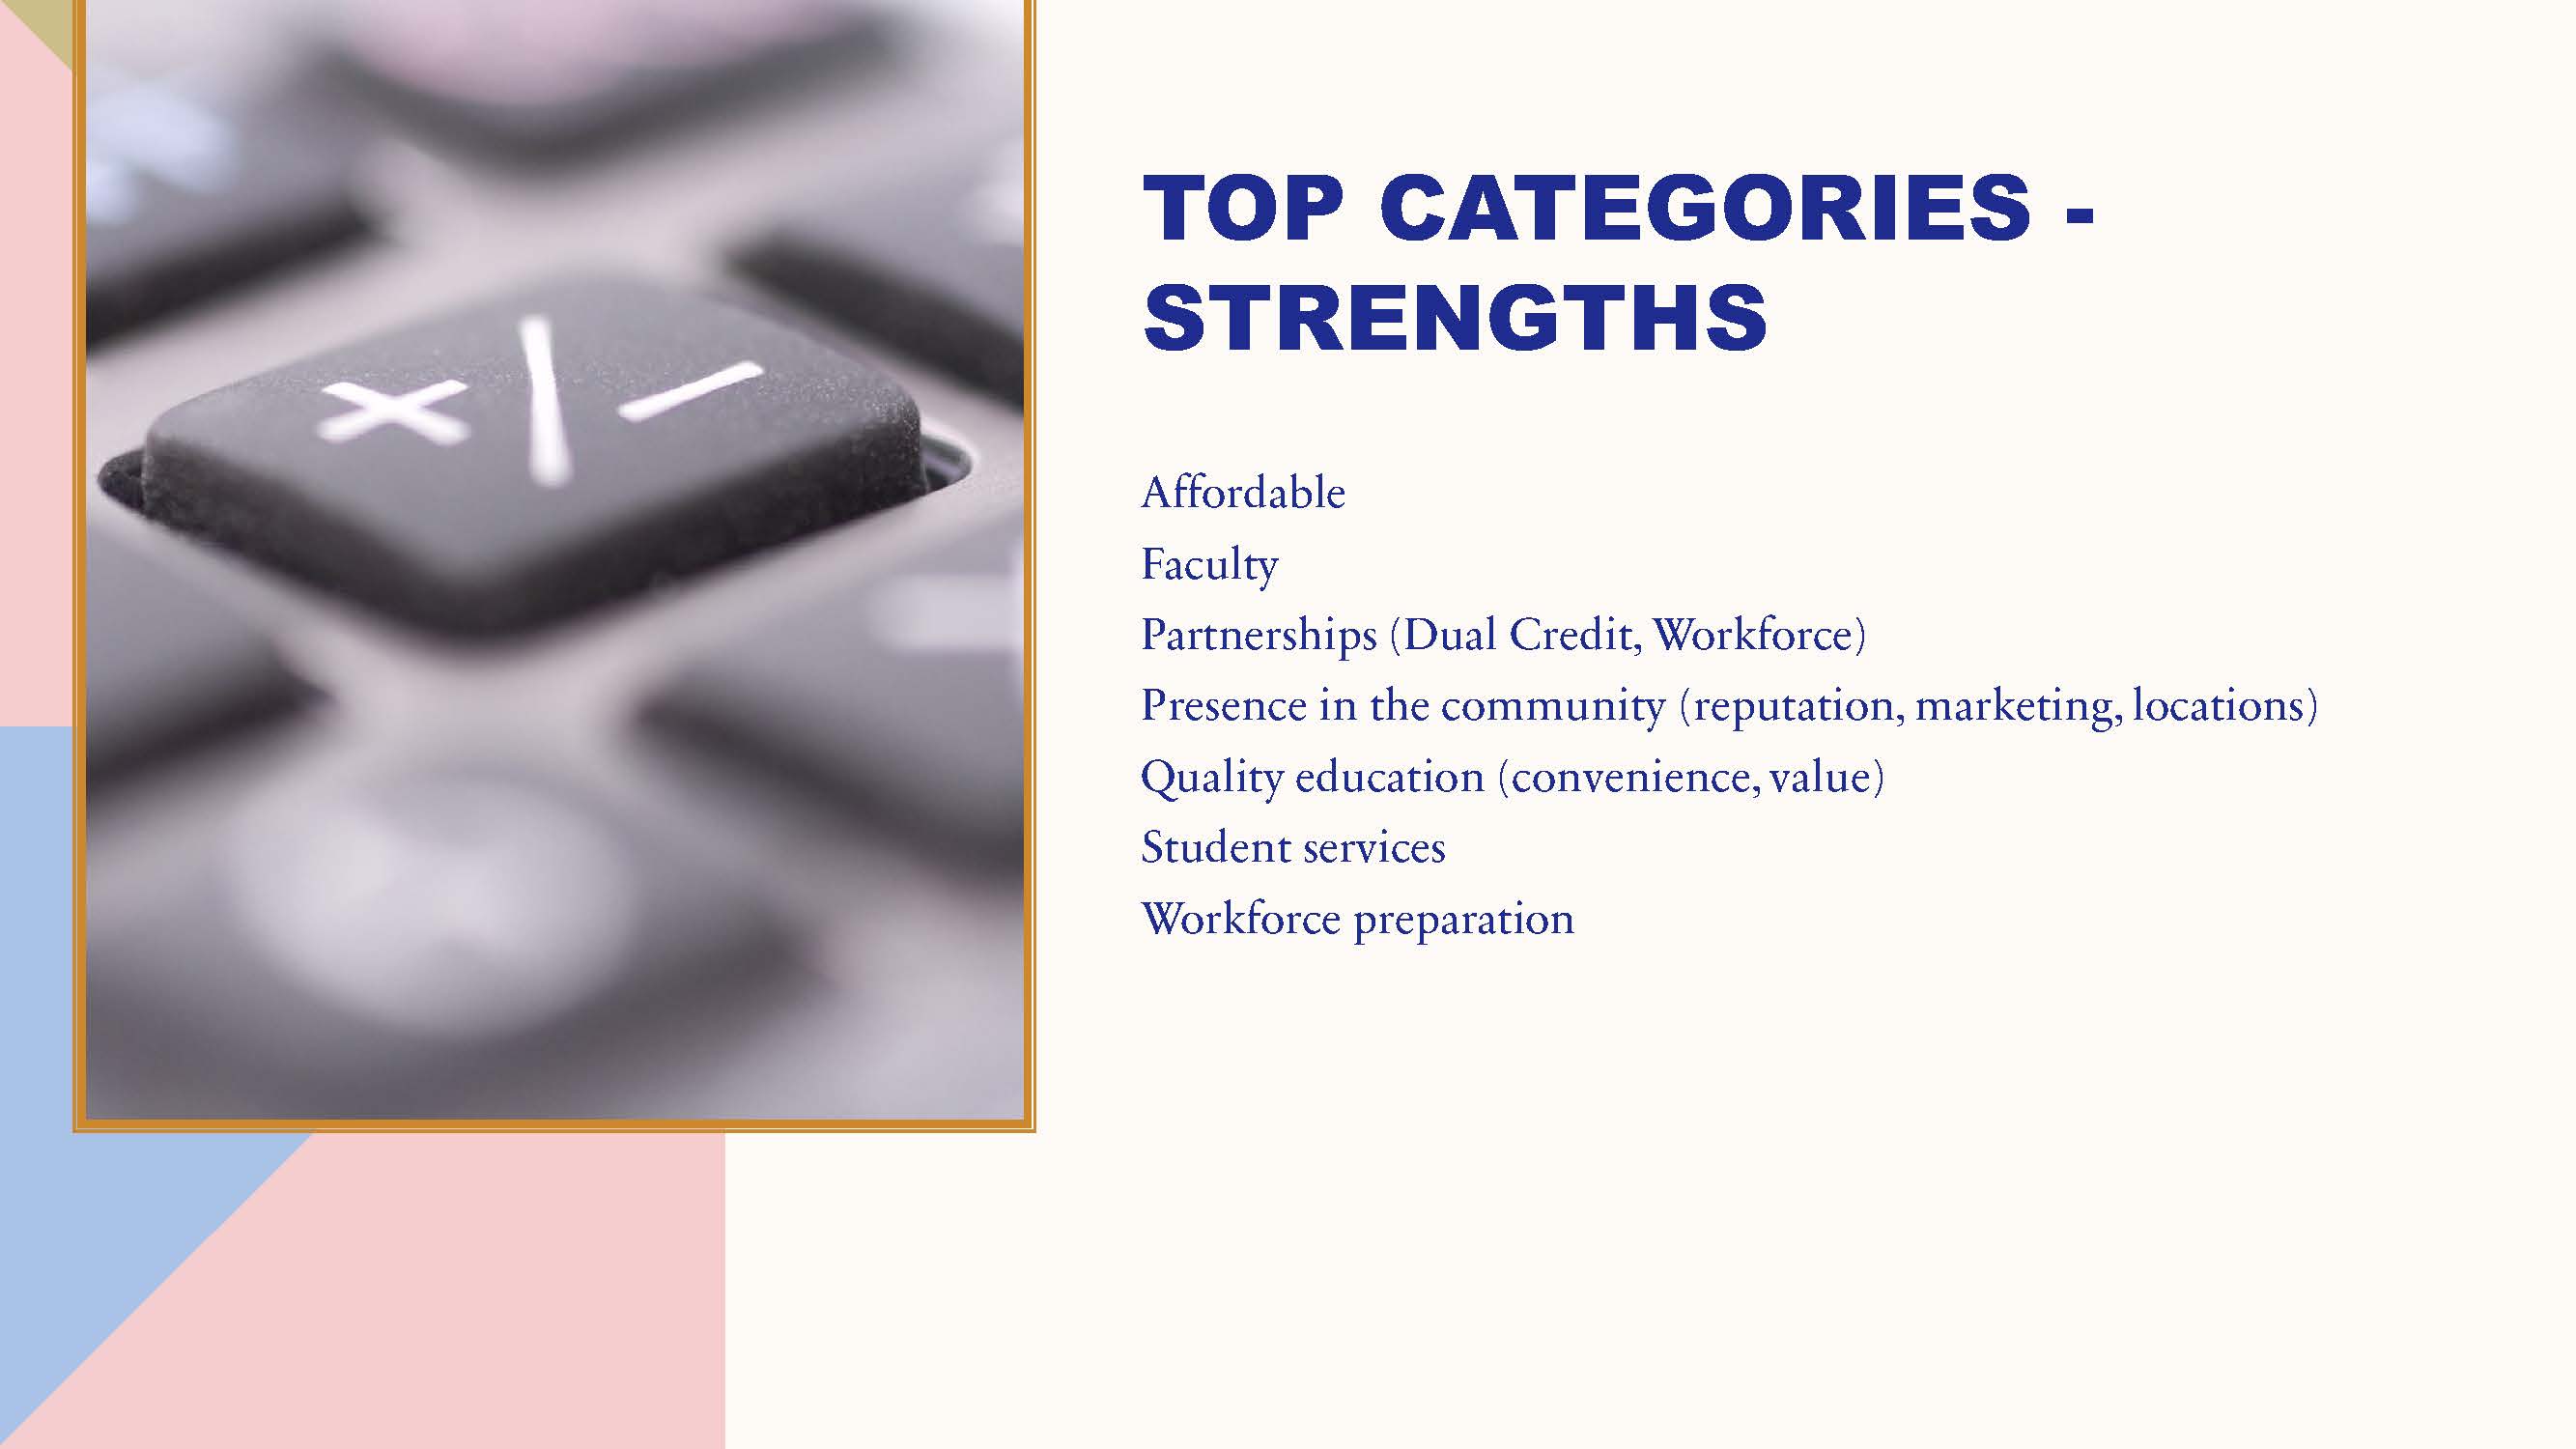 Slide showing top categories of Strengths, including Affordable Faculty Partnerships (Dual Credit, Workforce) Presence in the community (reputation, marketing, locations) Quality education (convenience, value) Student services Workforce preparation